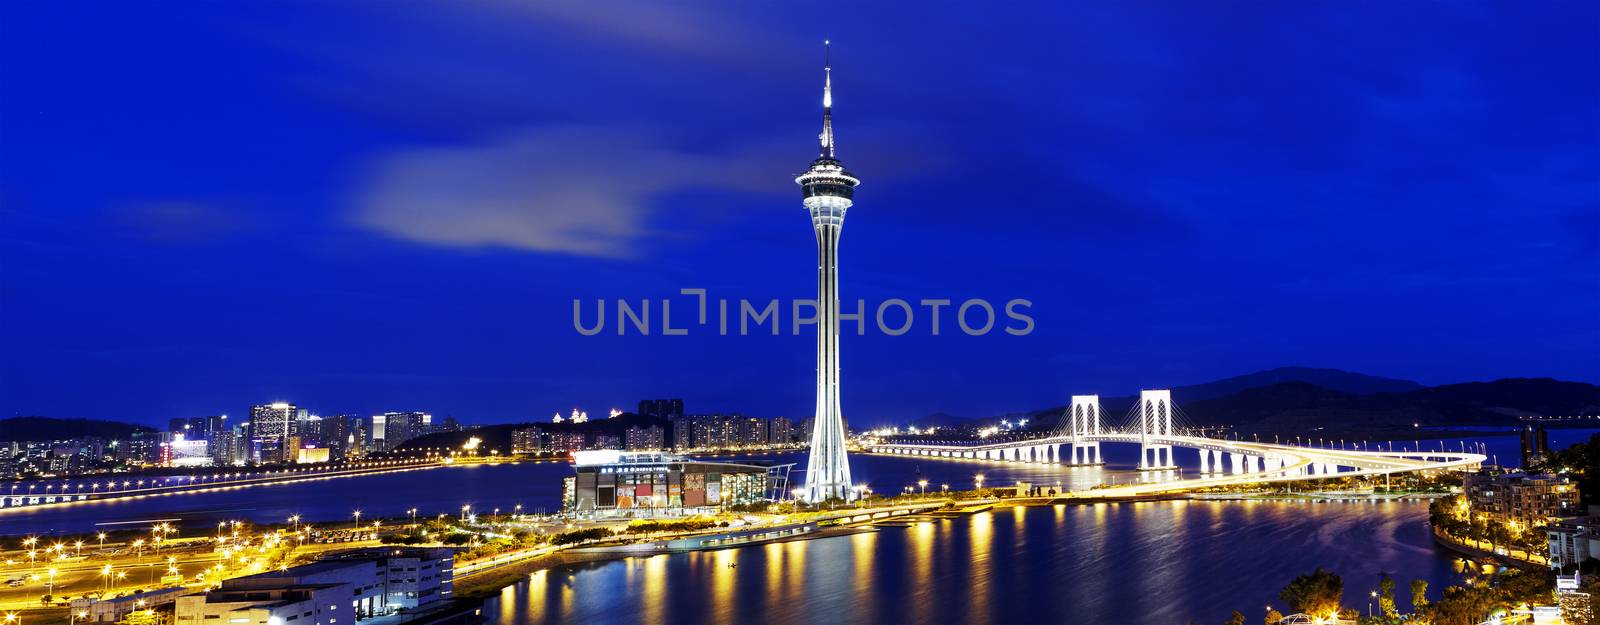 Urban landscape of Macau with famous traveling tower under blue sky near river in Macao, Asia. 